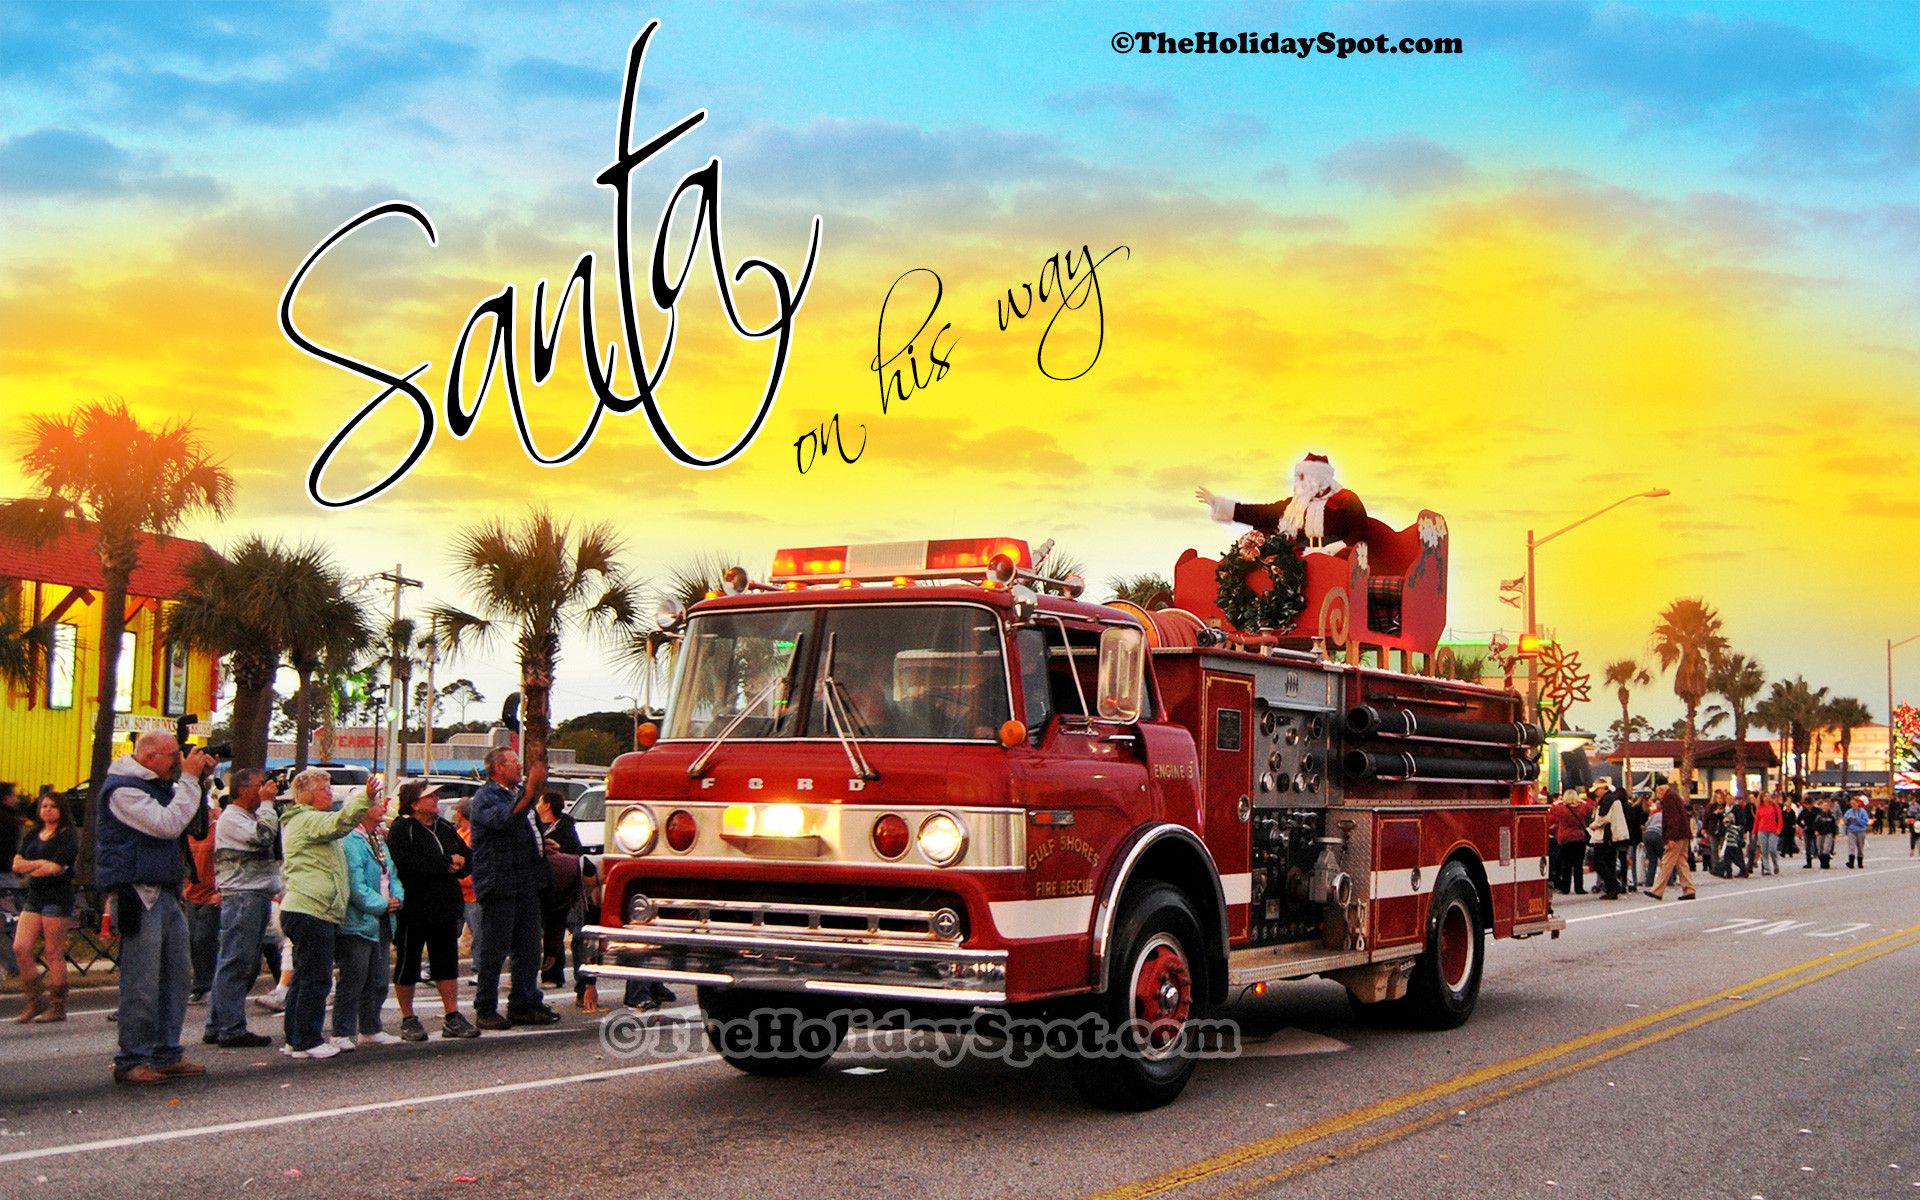 1920x1200 Christmas wallpaper of Santa coming to town on a firefighter truck.